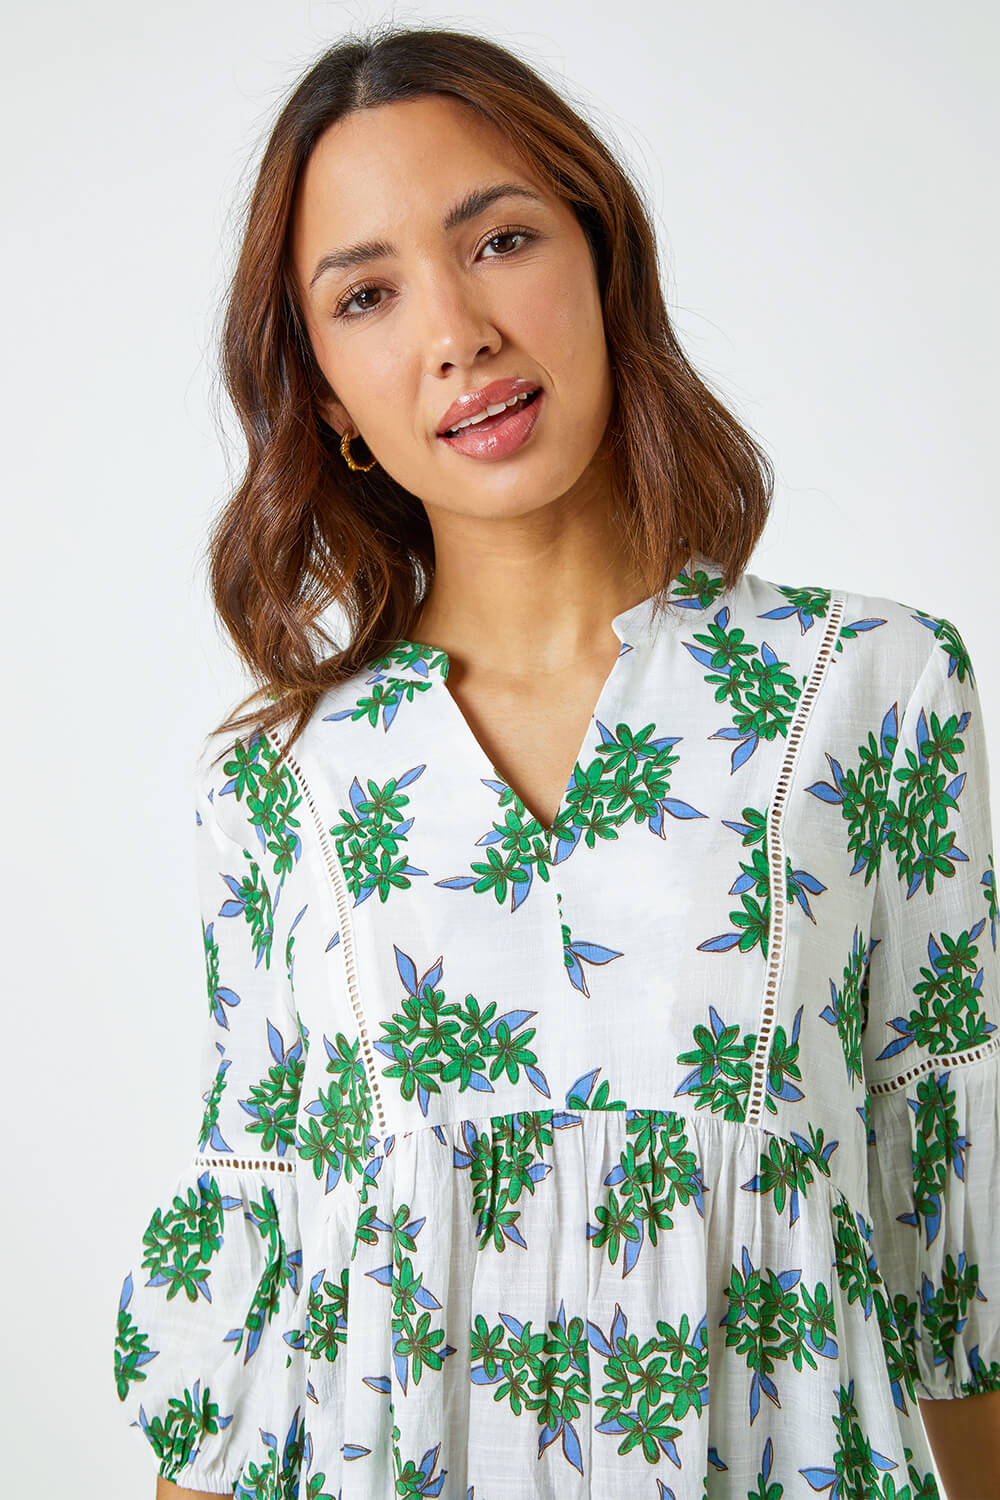 Green Floral Print Smock Tunic Top, Image 2 of 5